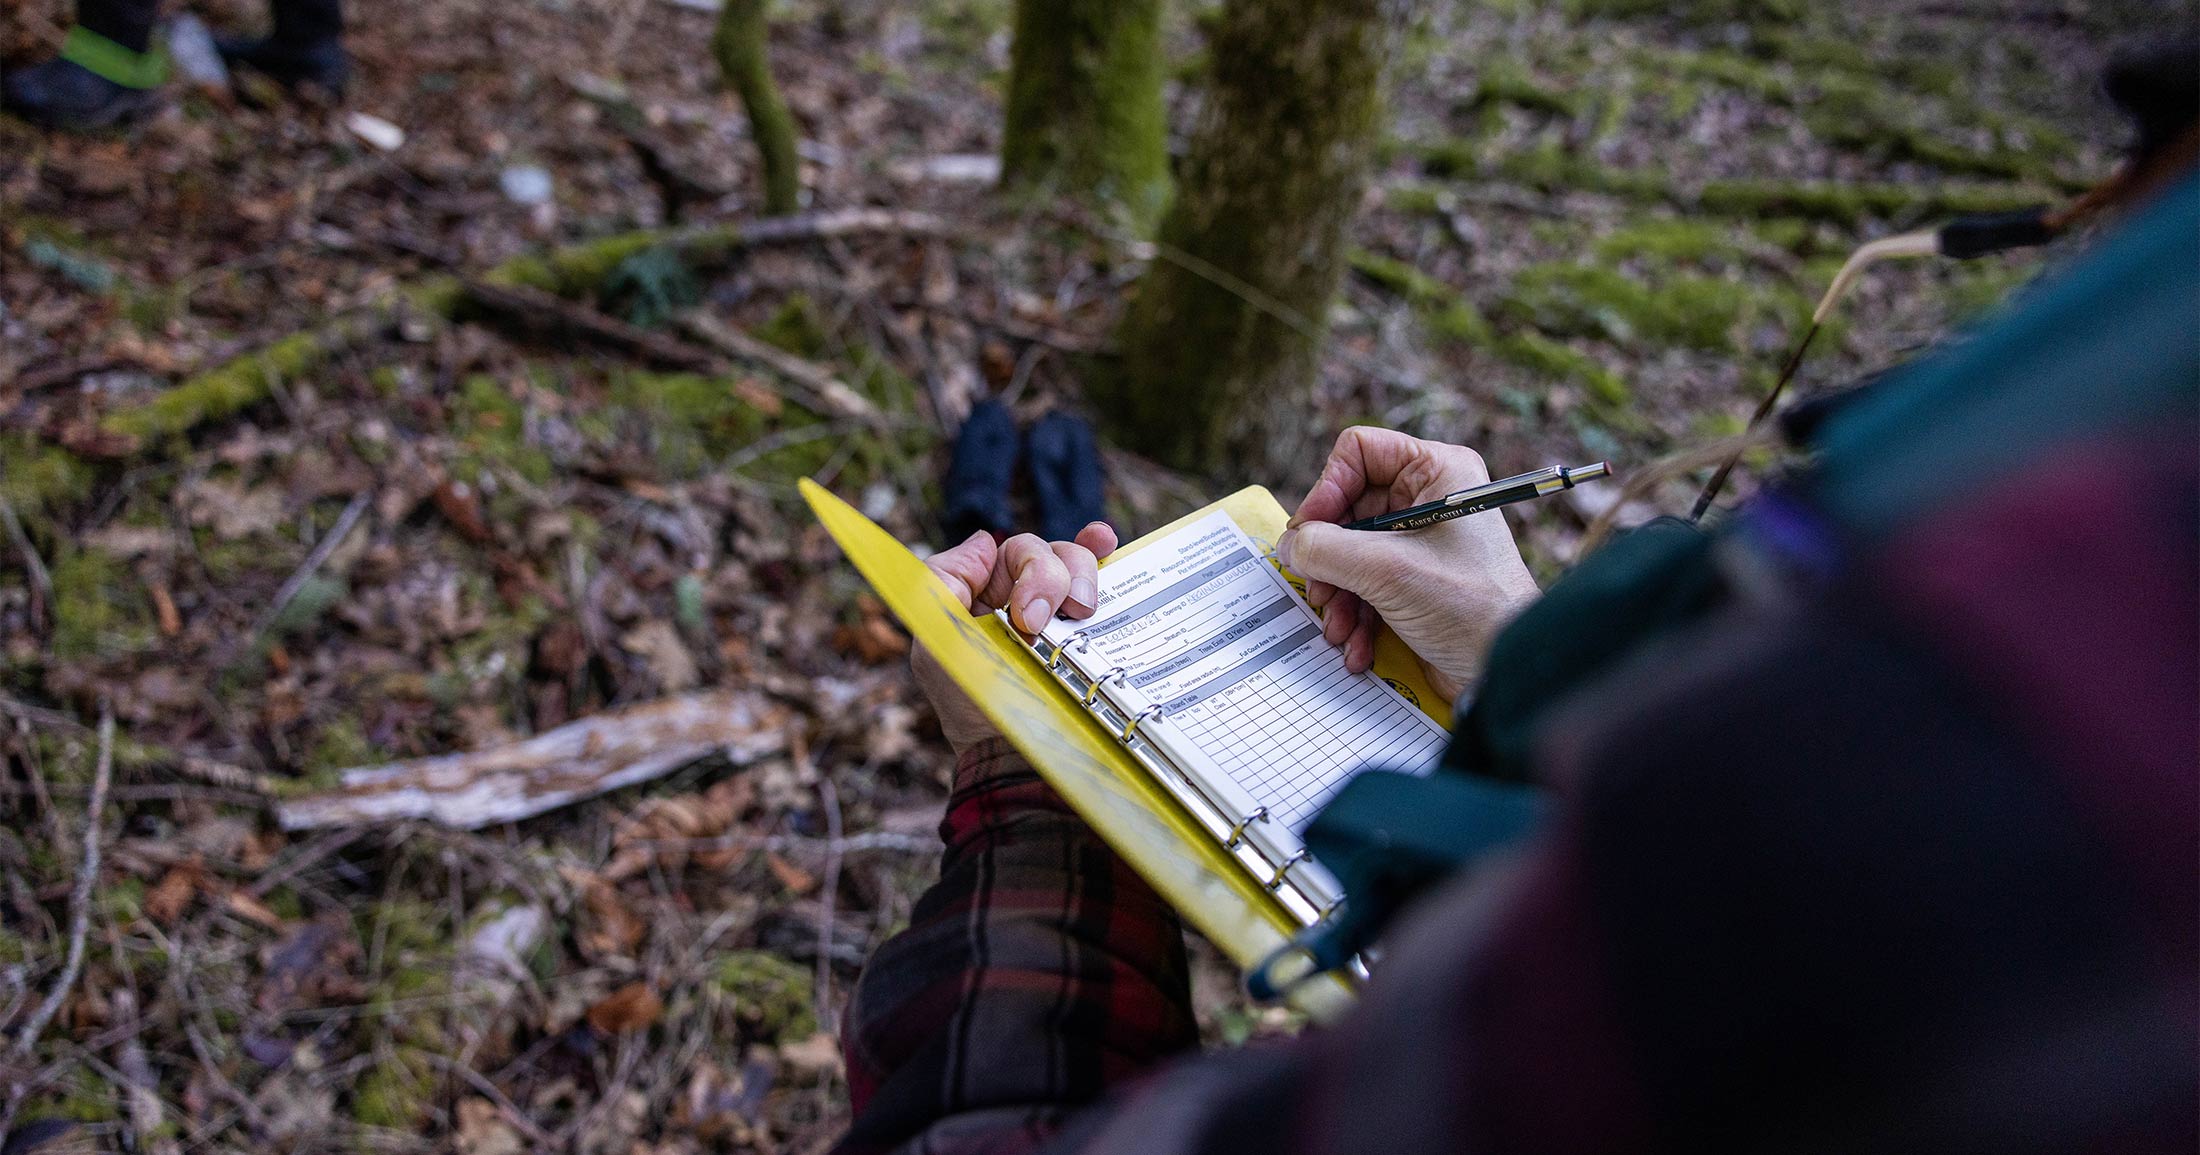 Someone writing in a field journal in a forest.